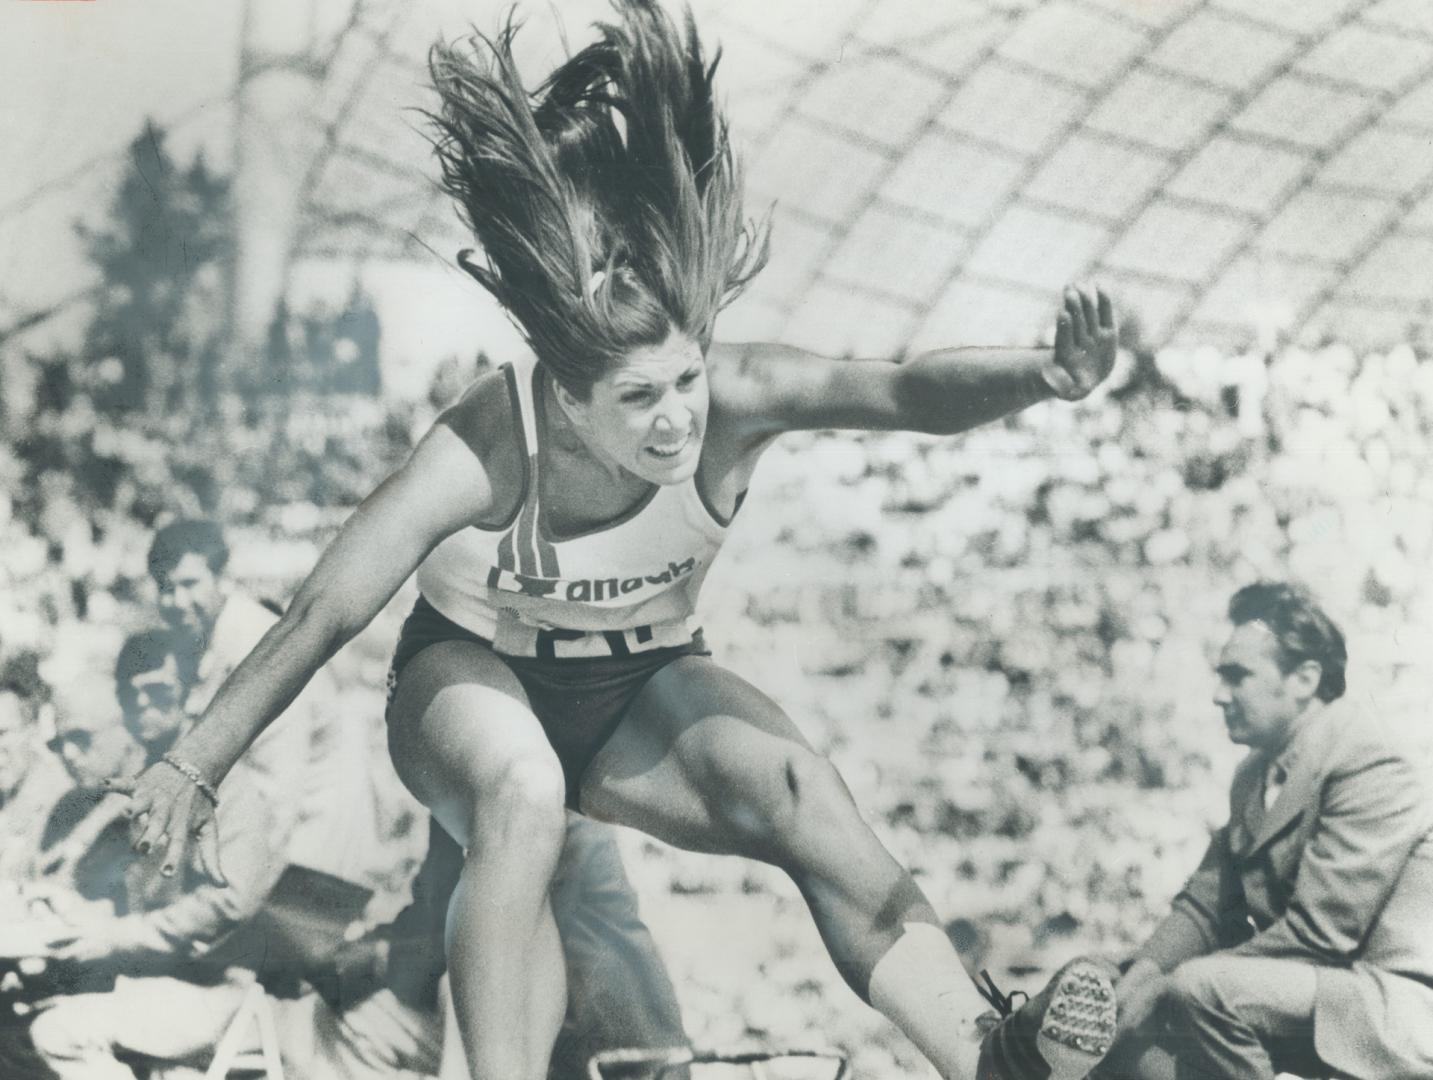 Debbie the sportswoman was the world's fourth best in the pentathlon in 1976, the year she retired from athletics